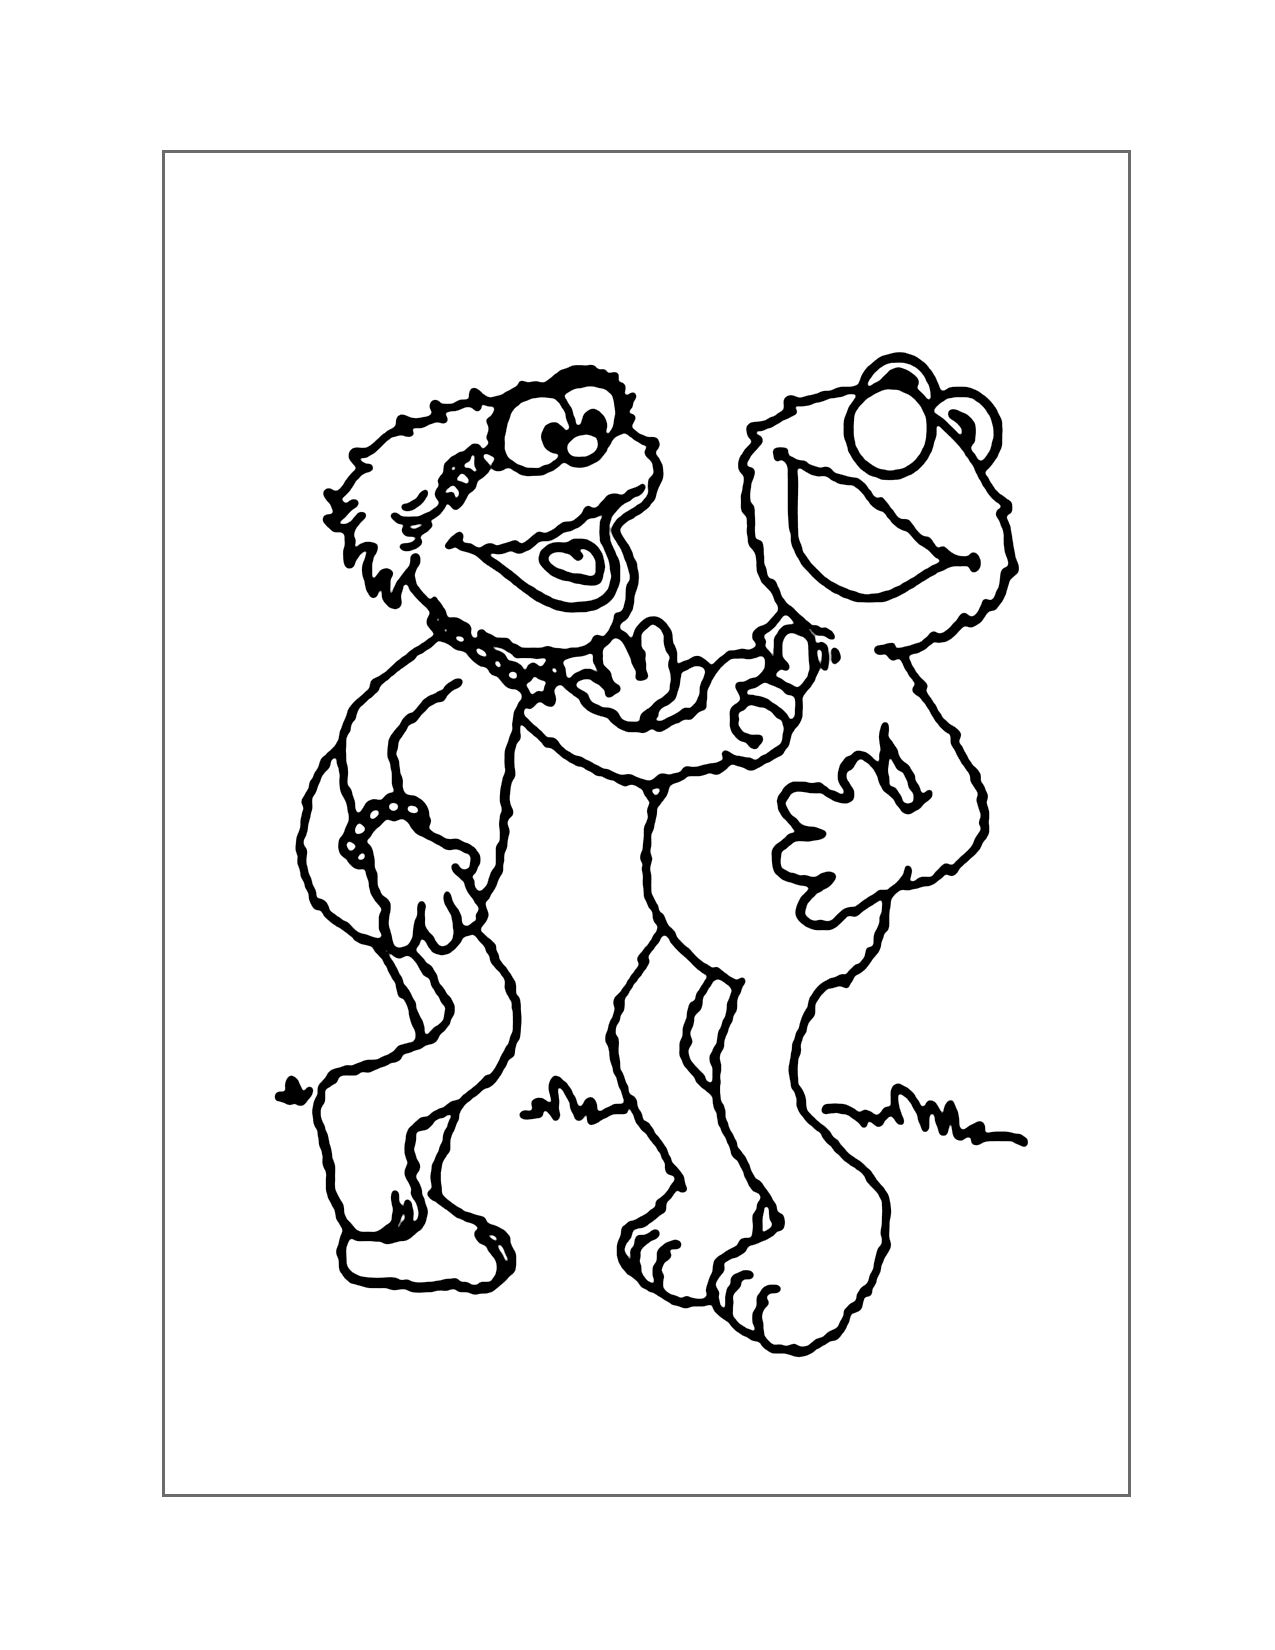 Zoey Making Elmo Laugh Coloring Page